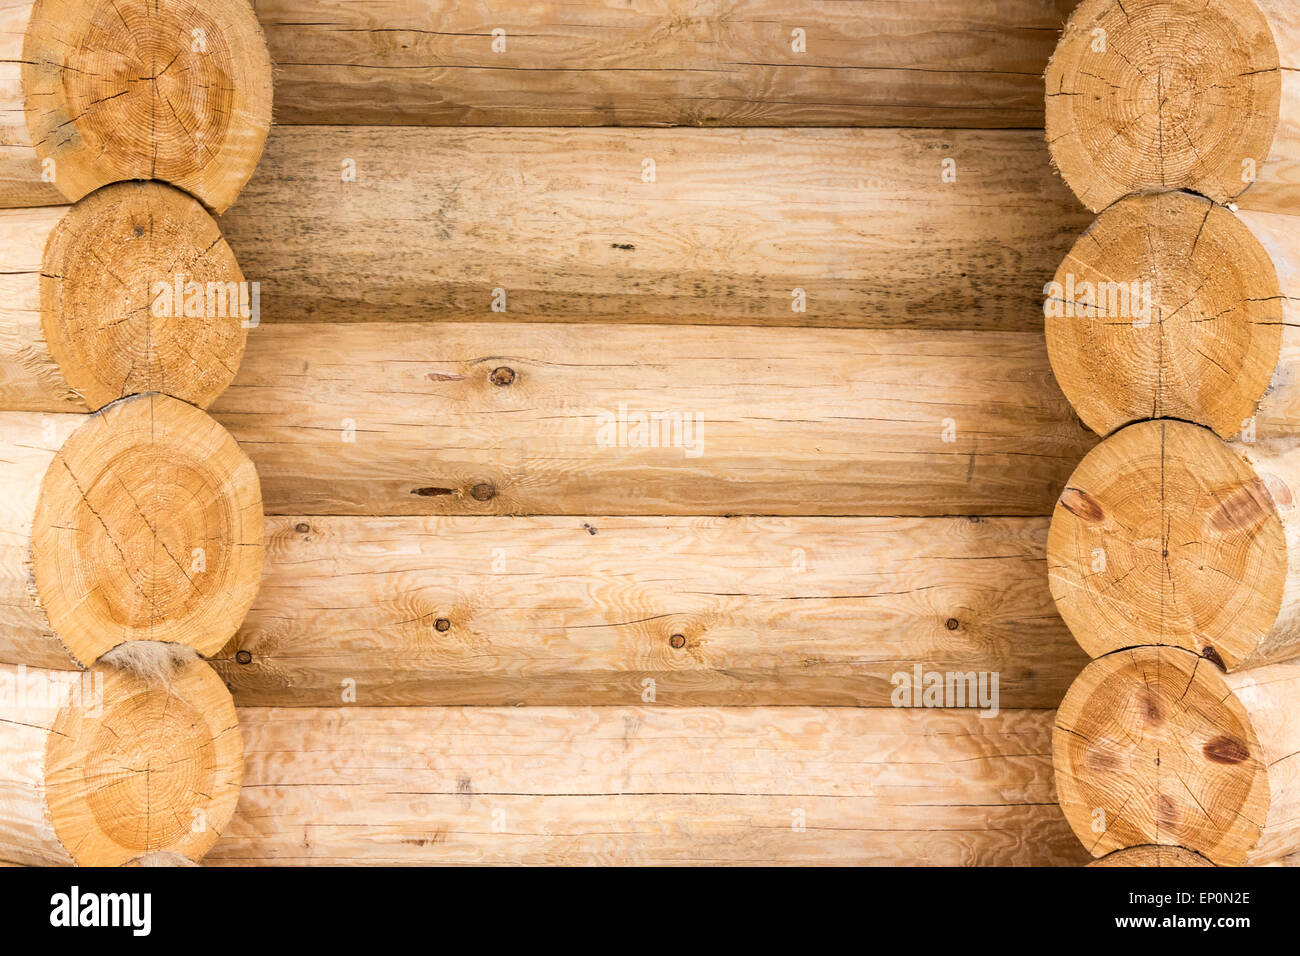 Round wooden board stock image. Image of blank, brown - 18709249